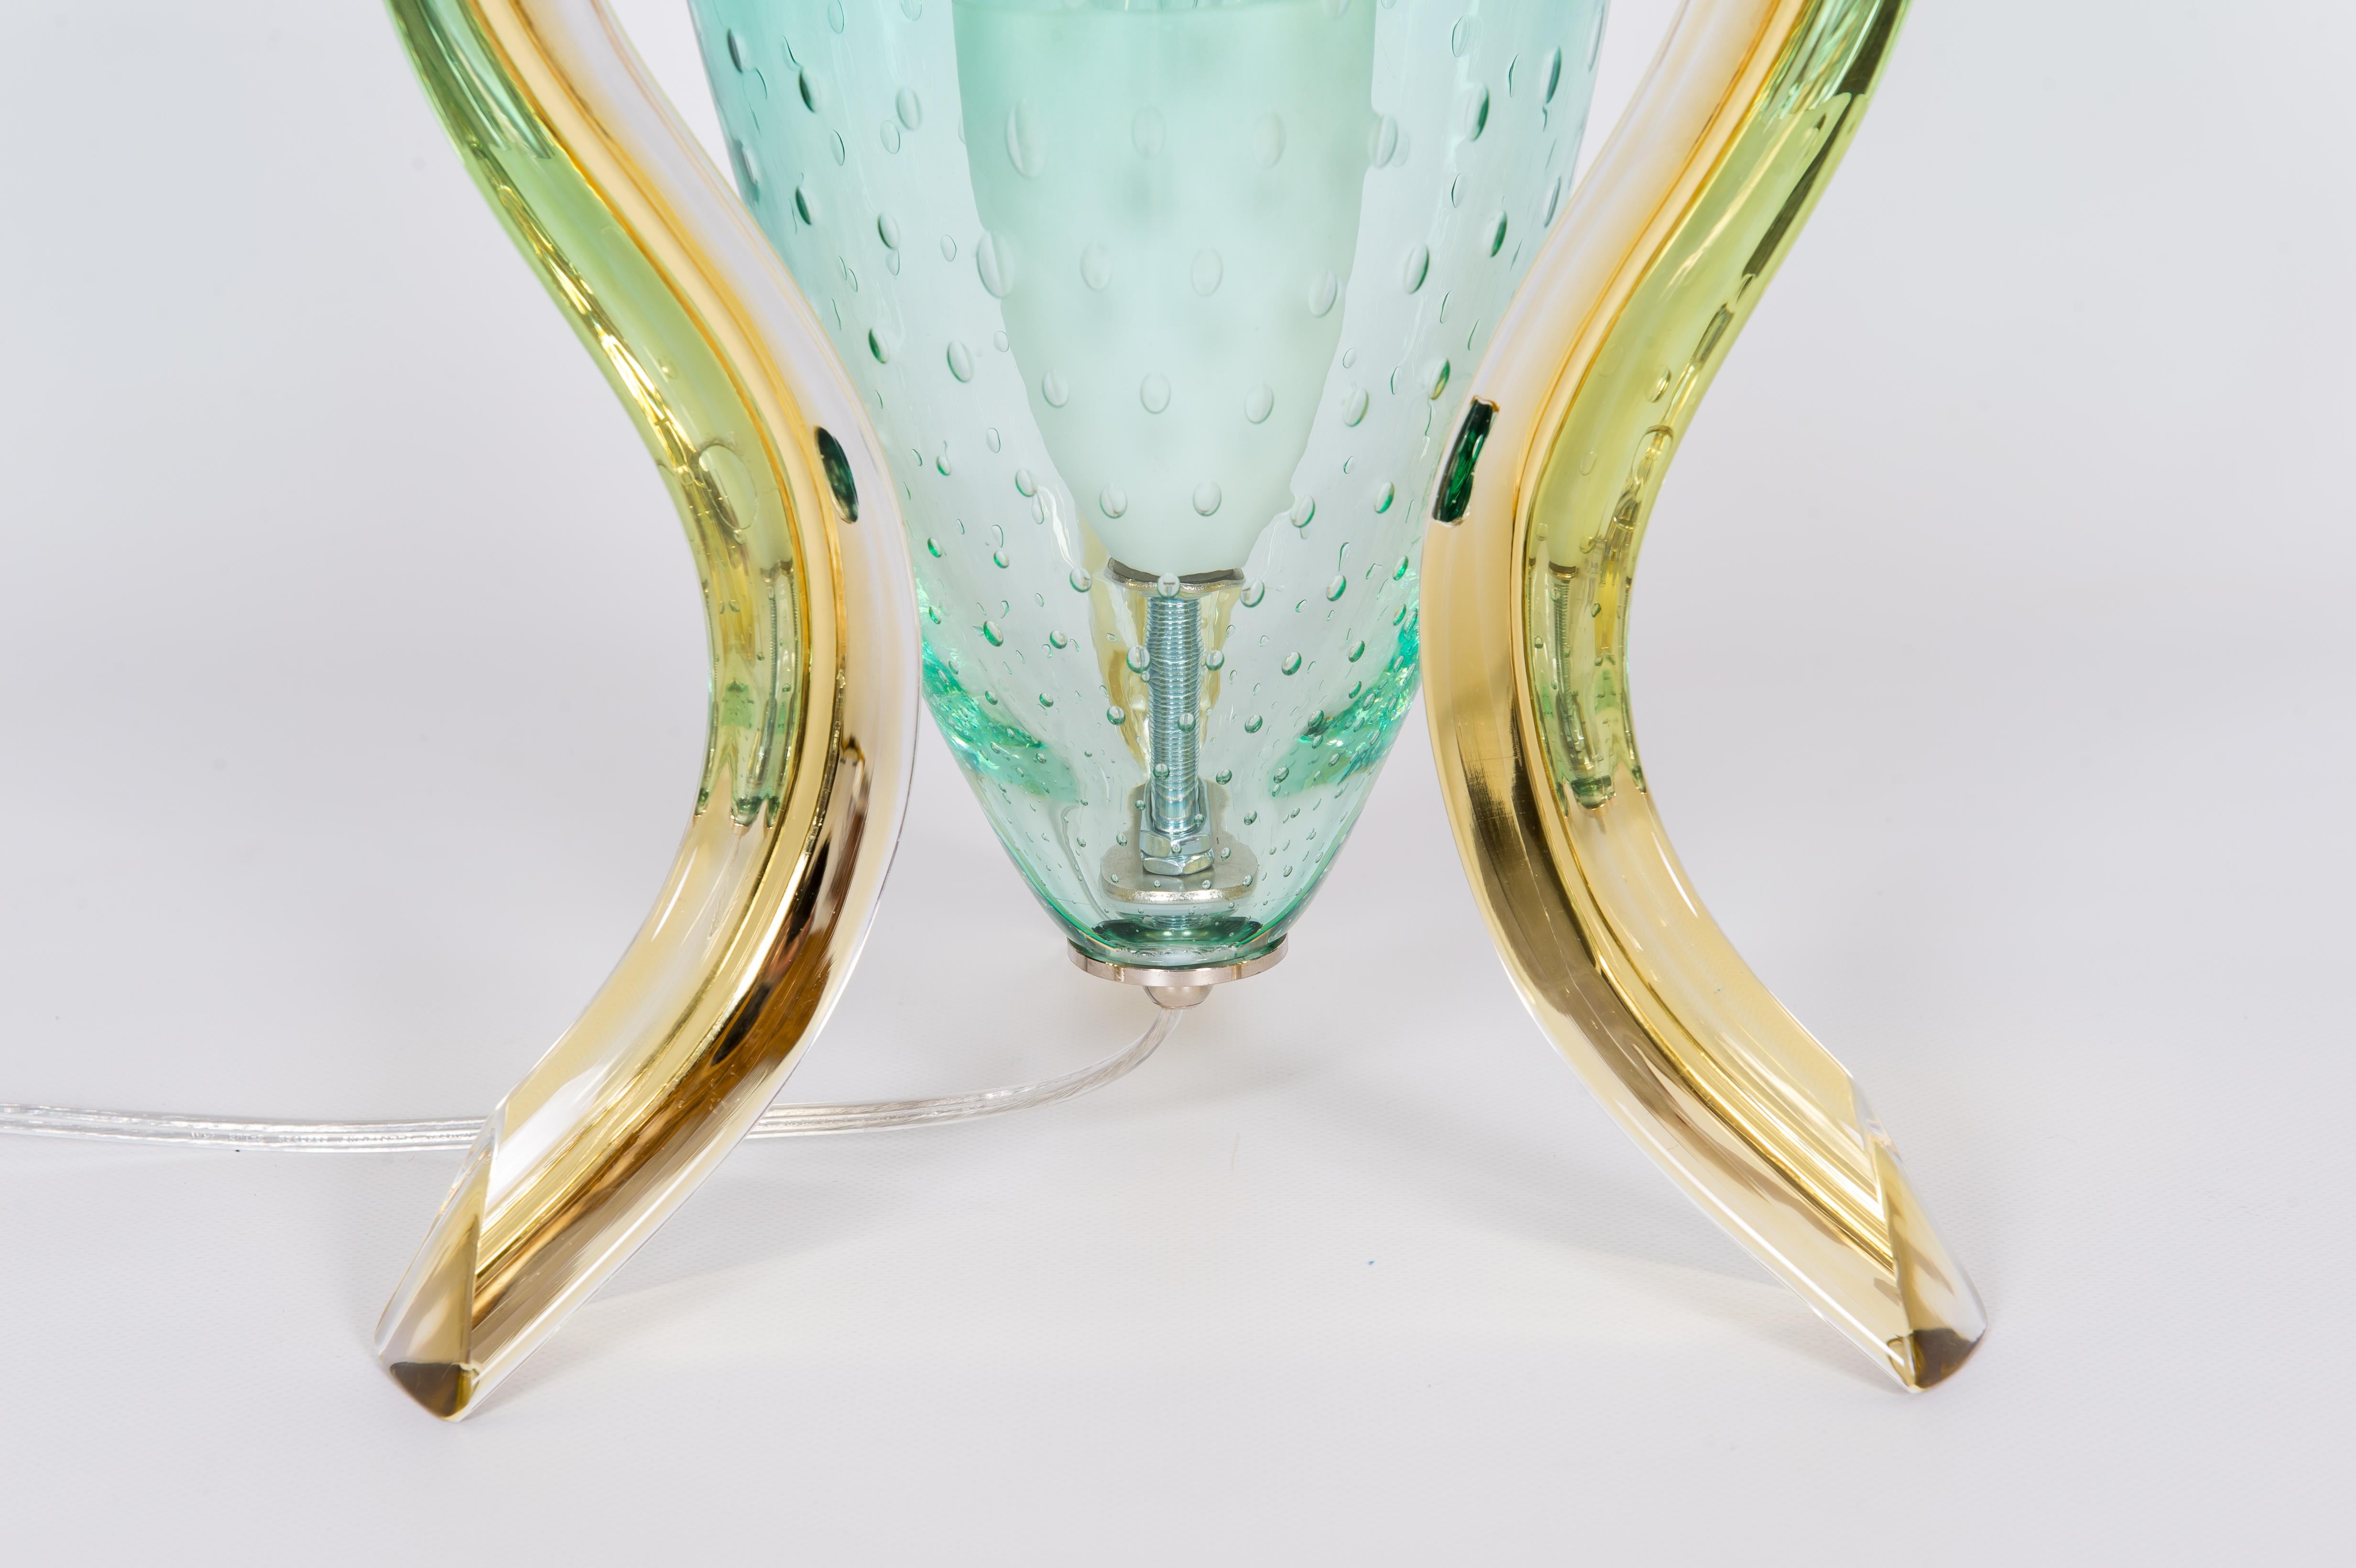 Italian Pair of Table Lamps in Blown Murano Glass Green and Amber limited, 1990s (Handgefertigt)